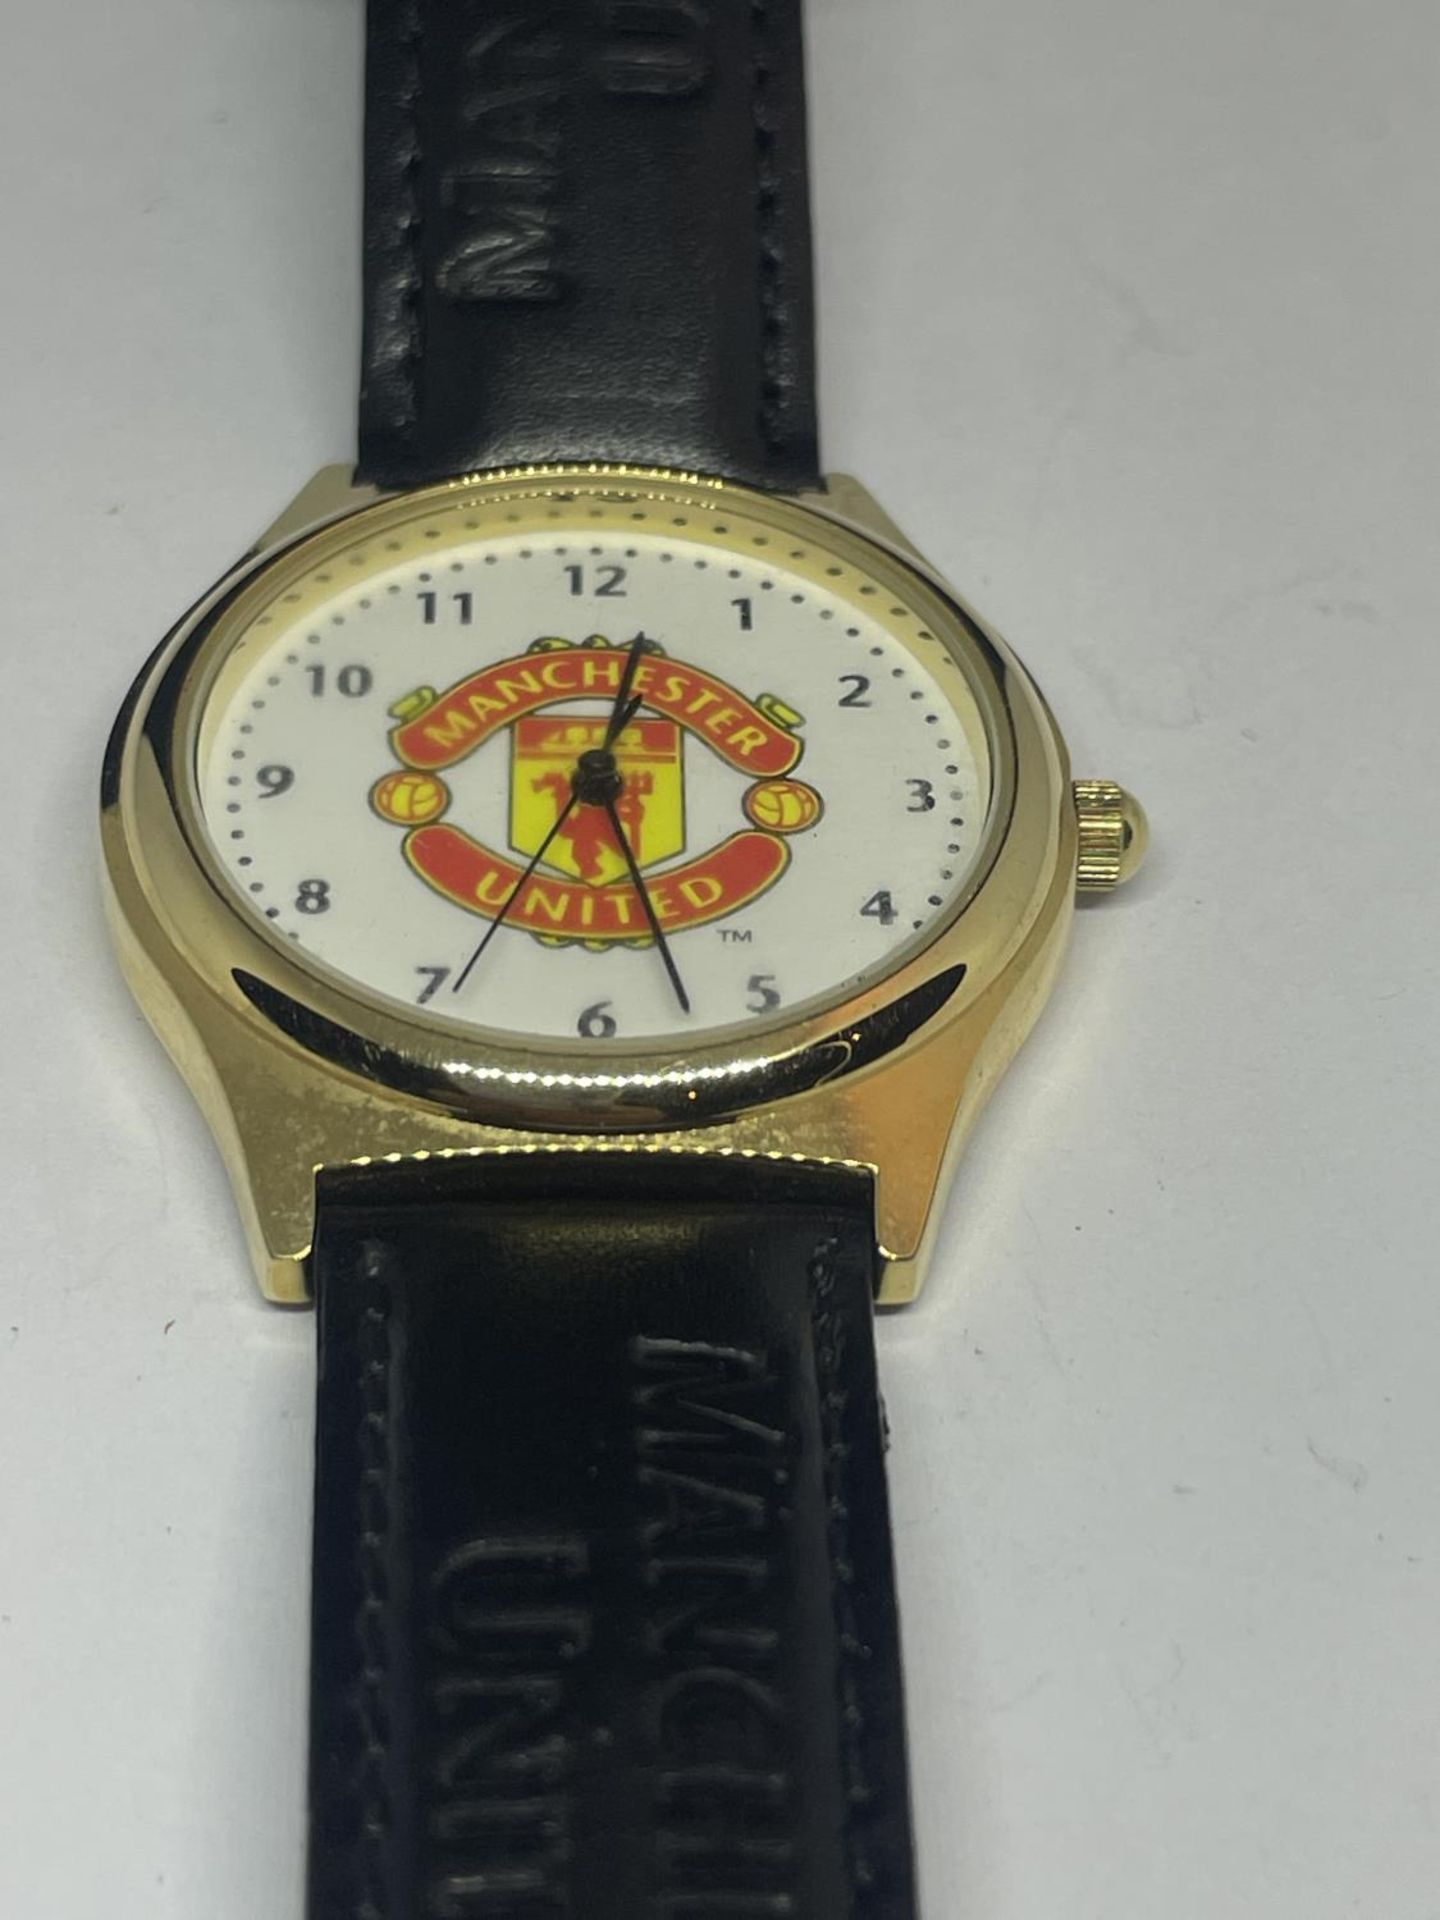 A MANCHESTER UNITED WRIST WATCH SEEN WORKING BUT NO WARRANTY - Image 2 of 3